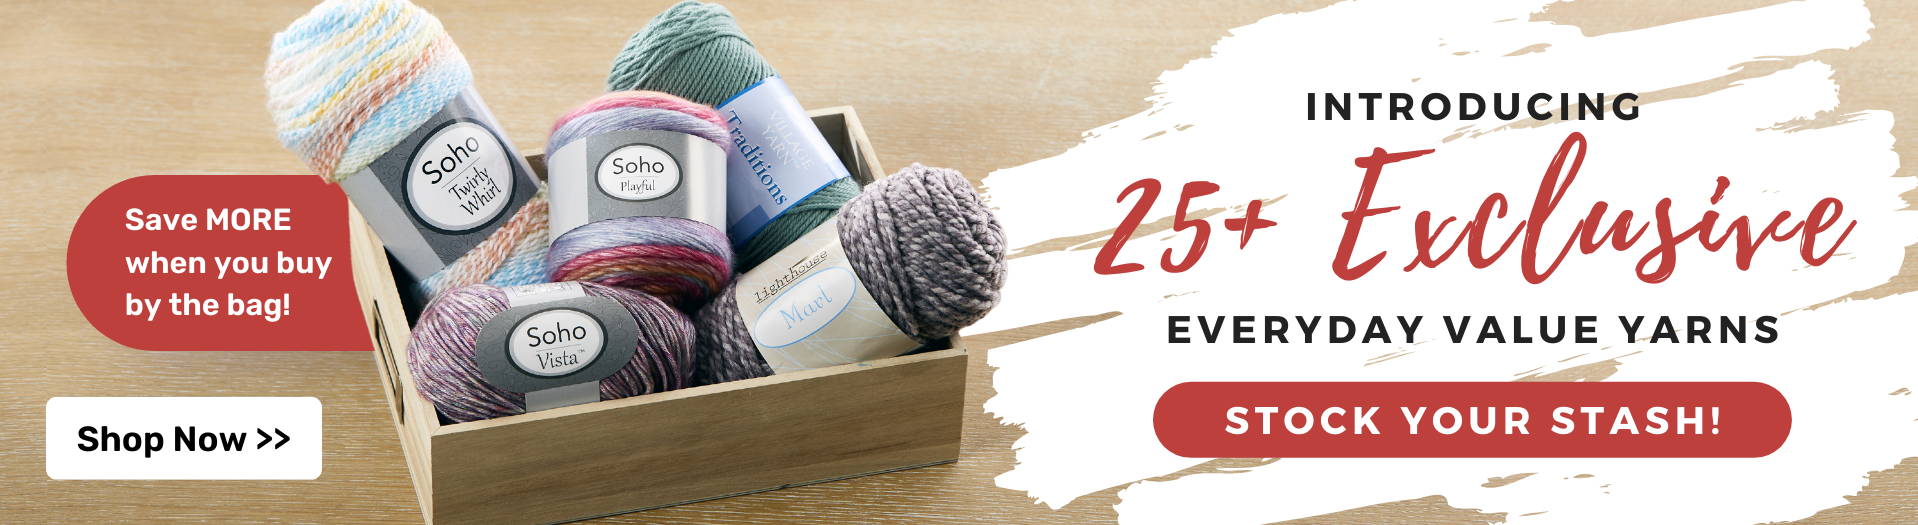 Introducing 25+ Exclusive Everyday Value Yarns . Save More when you buy by the bag!